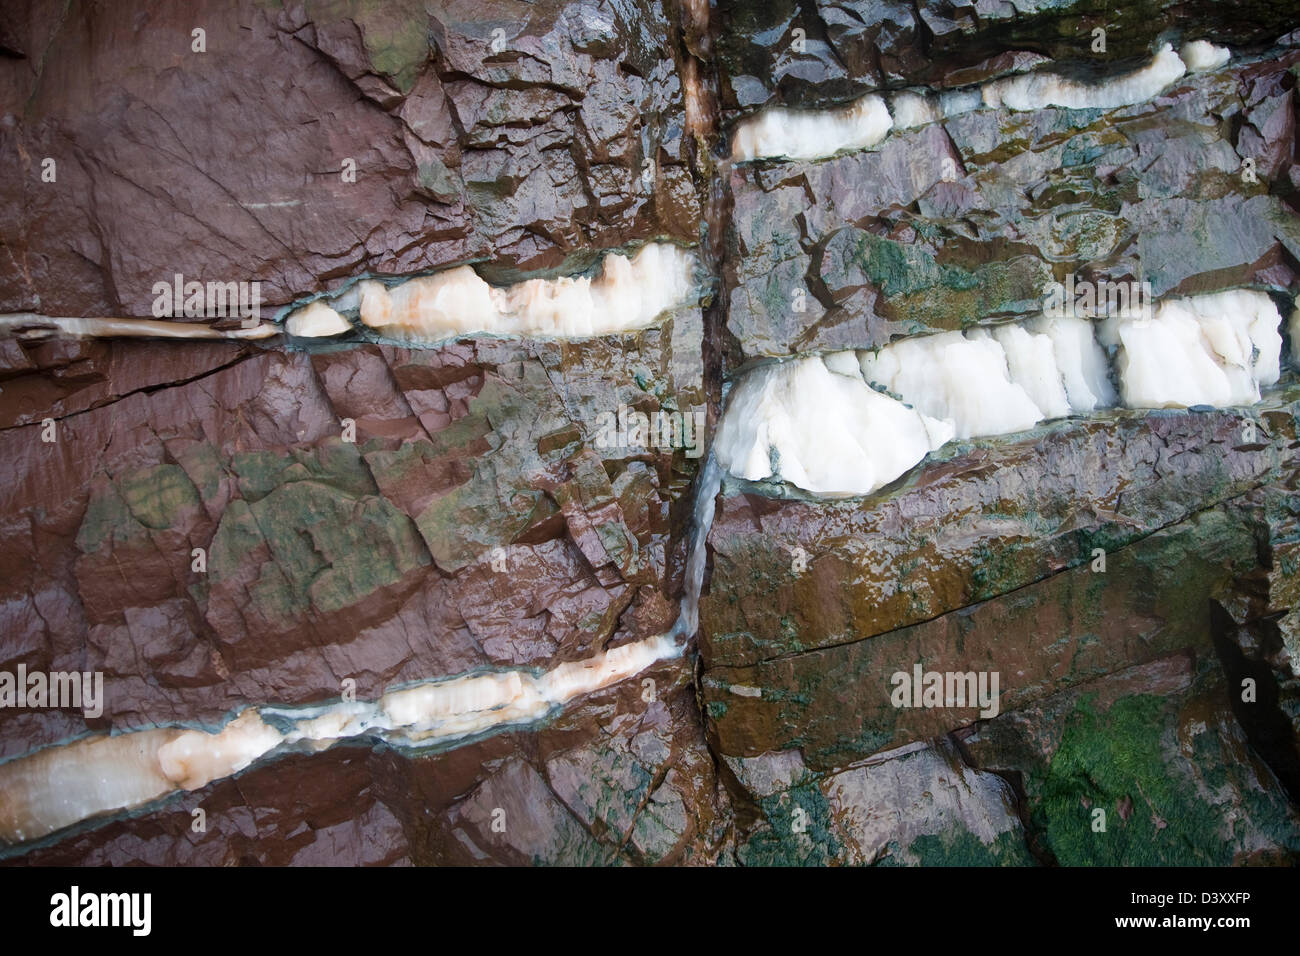 Faulting with veins of gypsum in Lower Lias rocks Watchet, Somerset, England Stock Photo